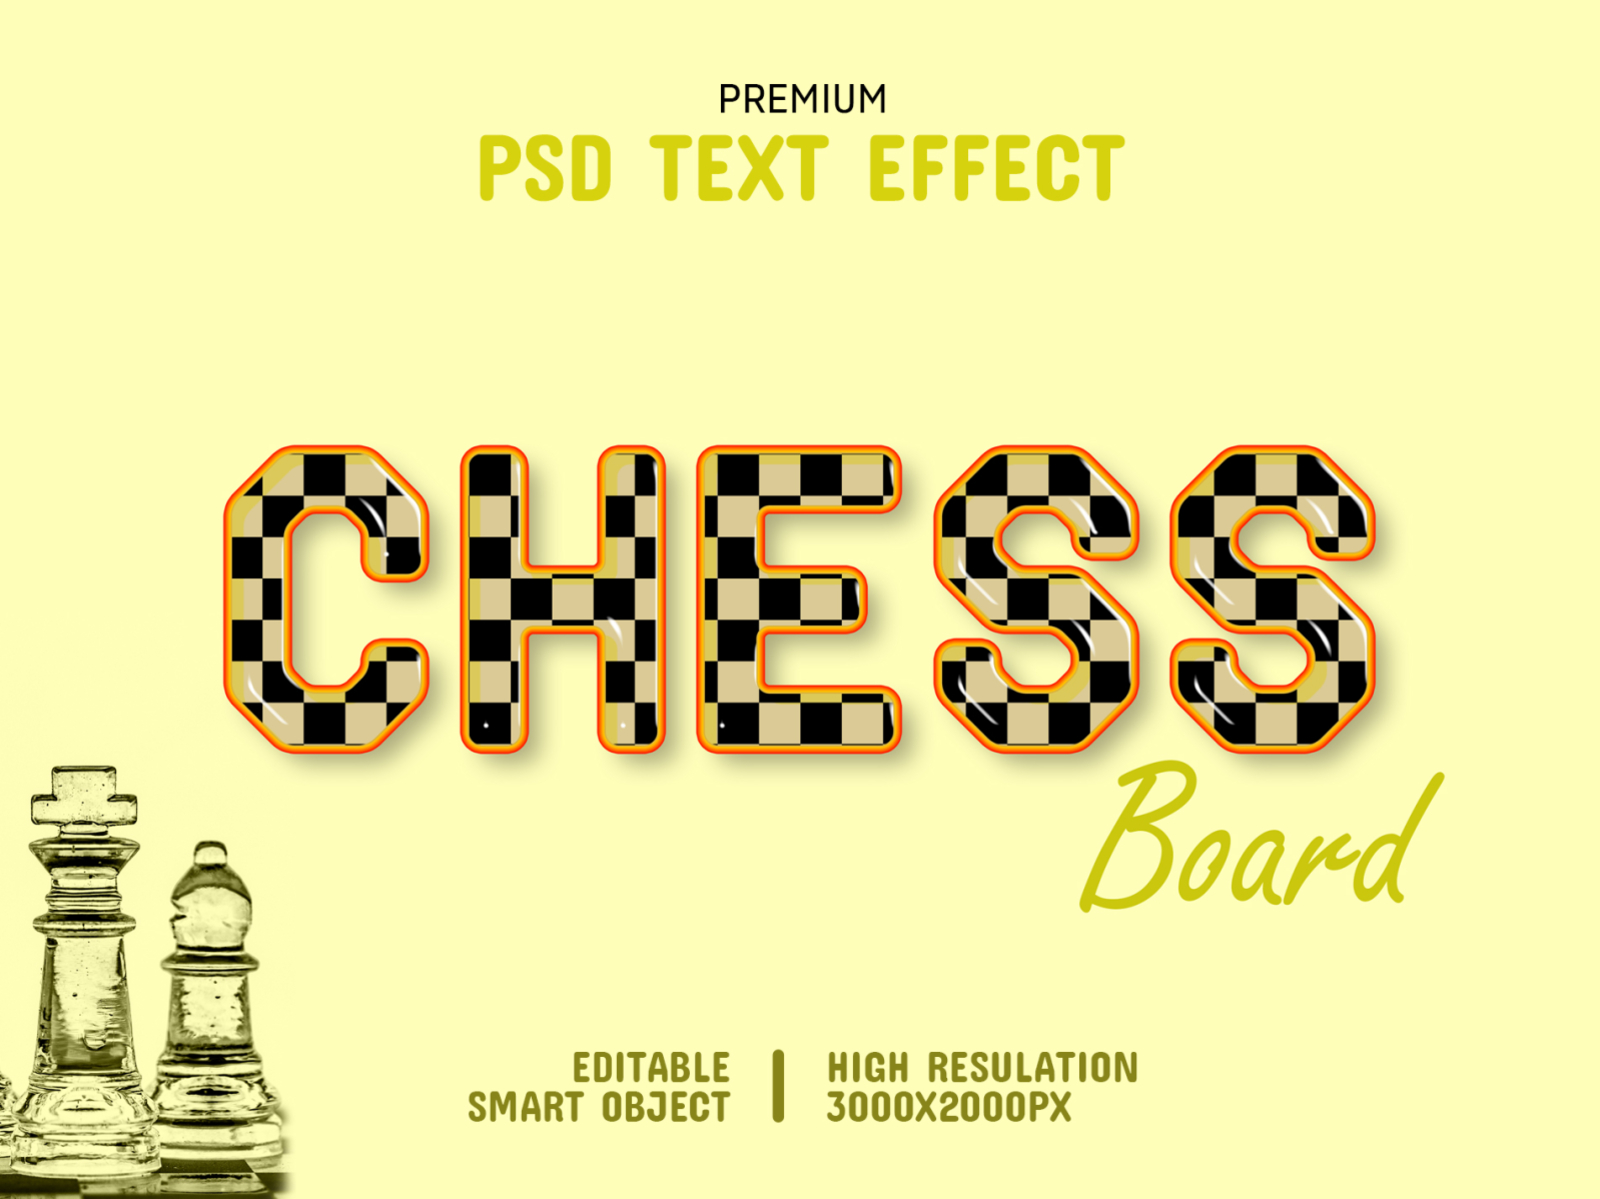 Download Chess Template Flyer PSD